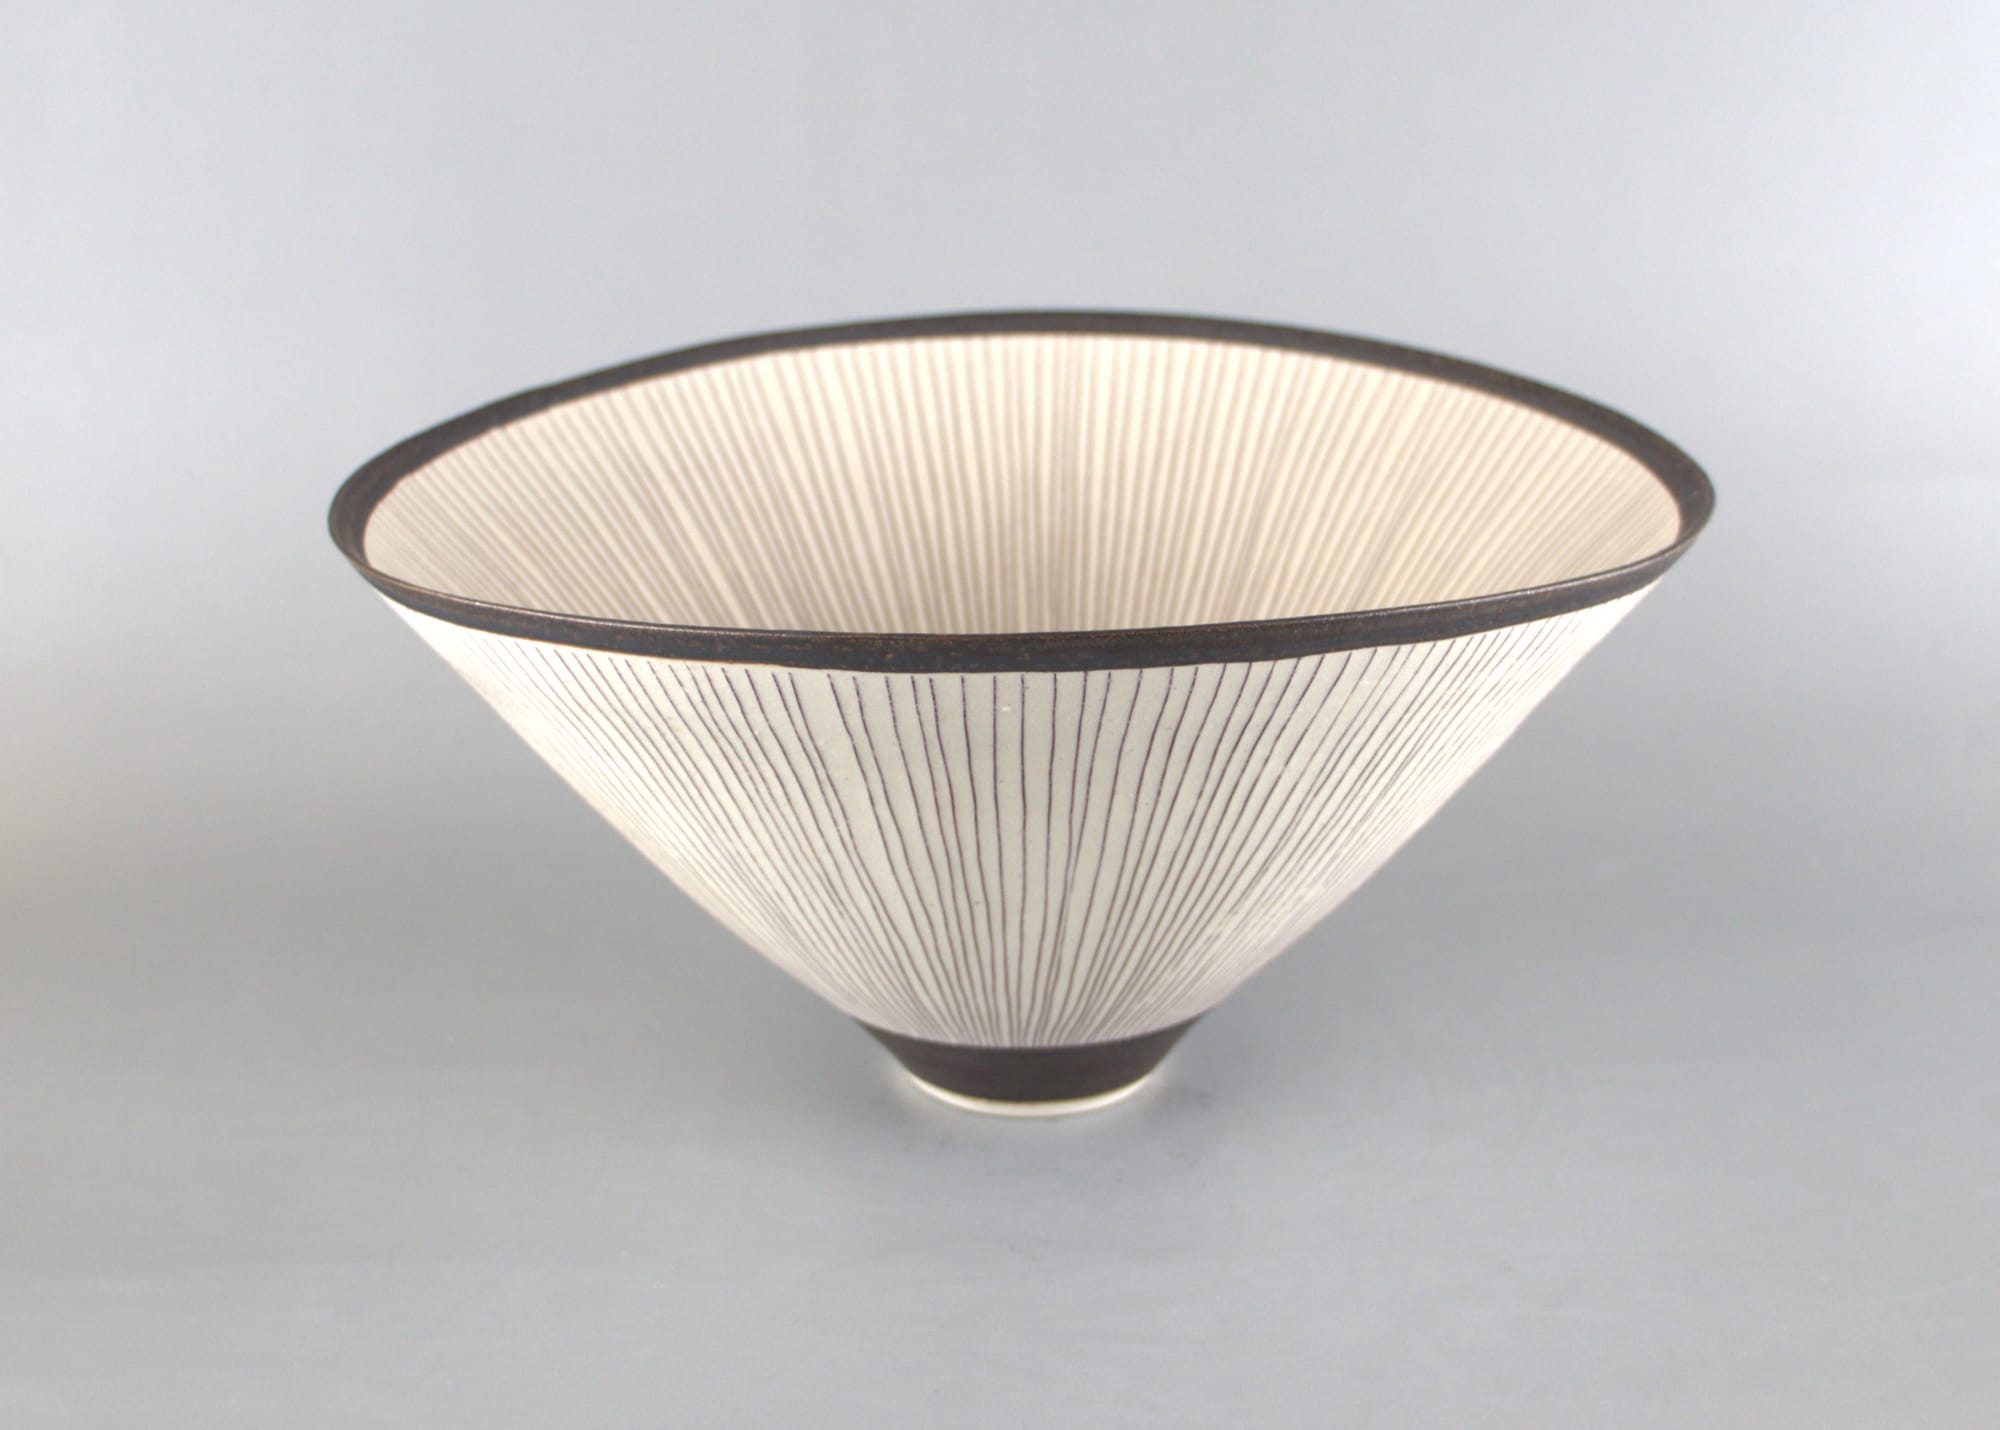 Object of the month: "Bowl" by Lucie Rie